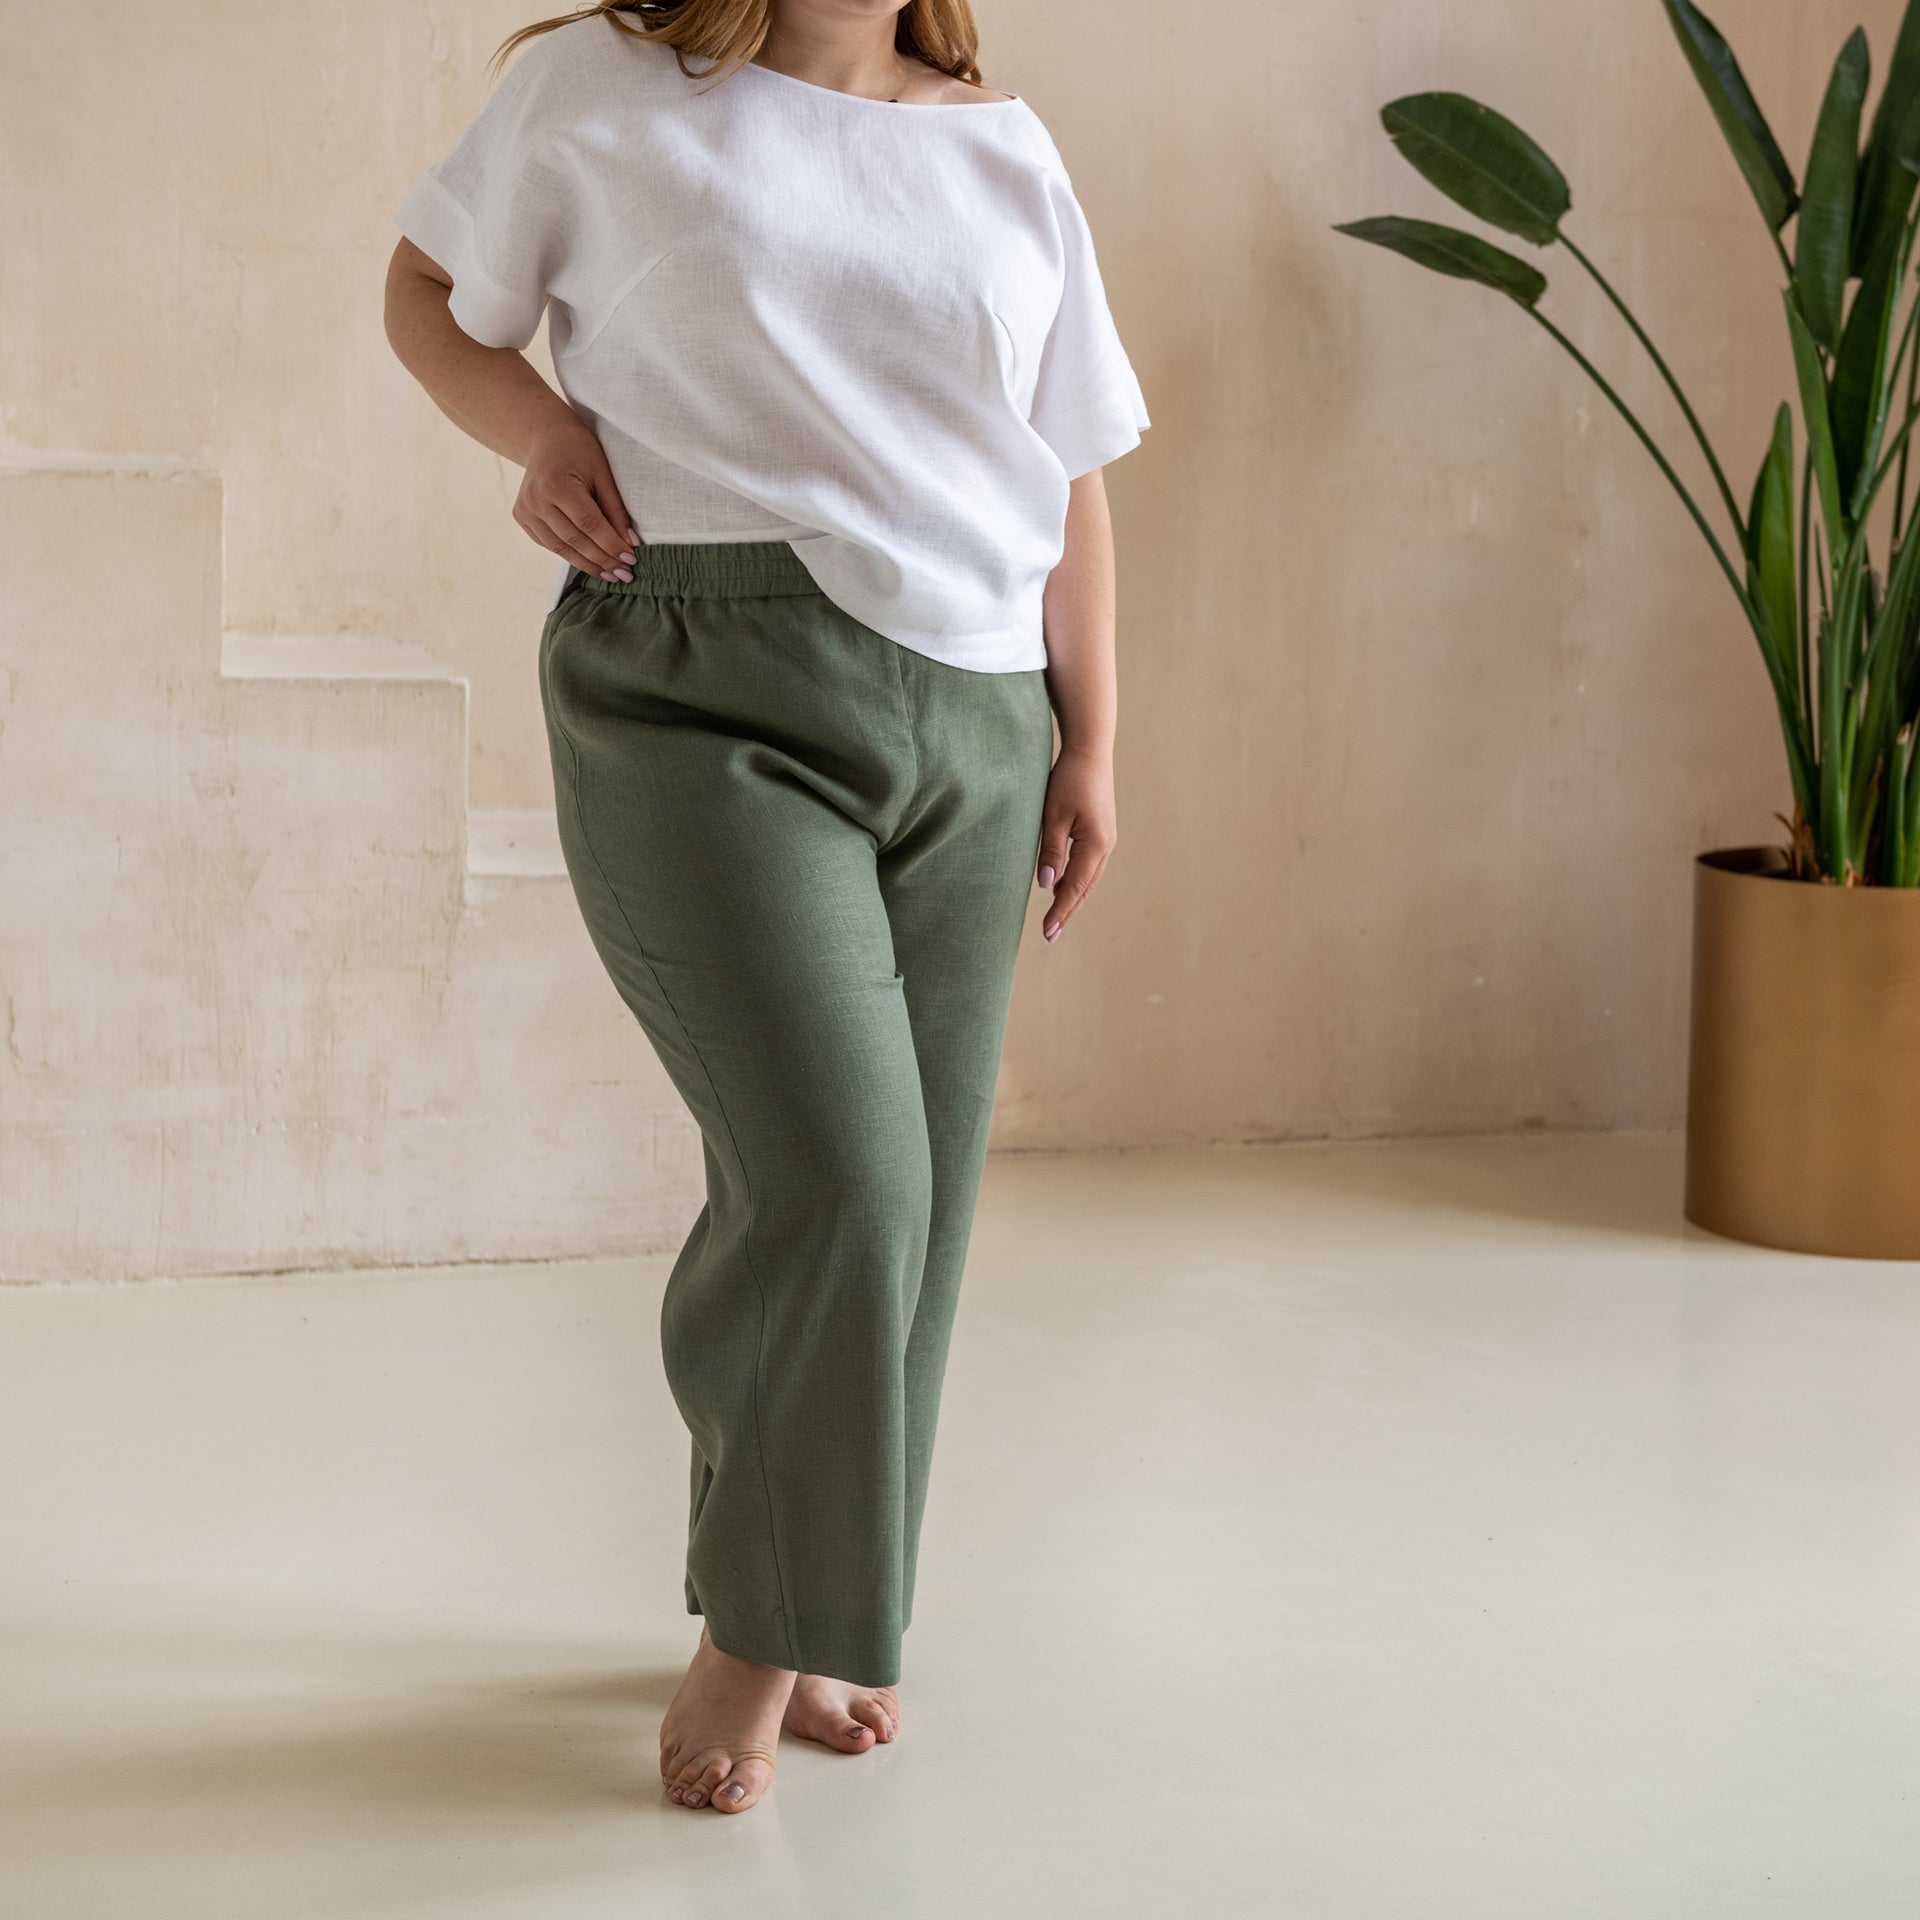 View our High Waisted Wide Leg Pant and shop our selection of designer  women'…  Wide leg pants outfit, High waisted wide leg pants, Wide leg pants  outfit plus size